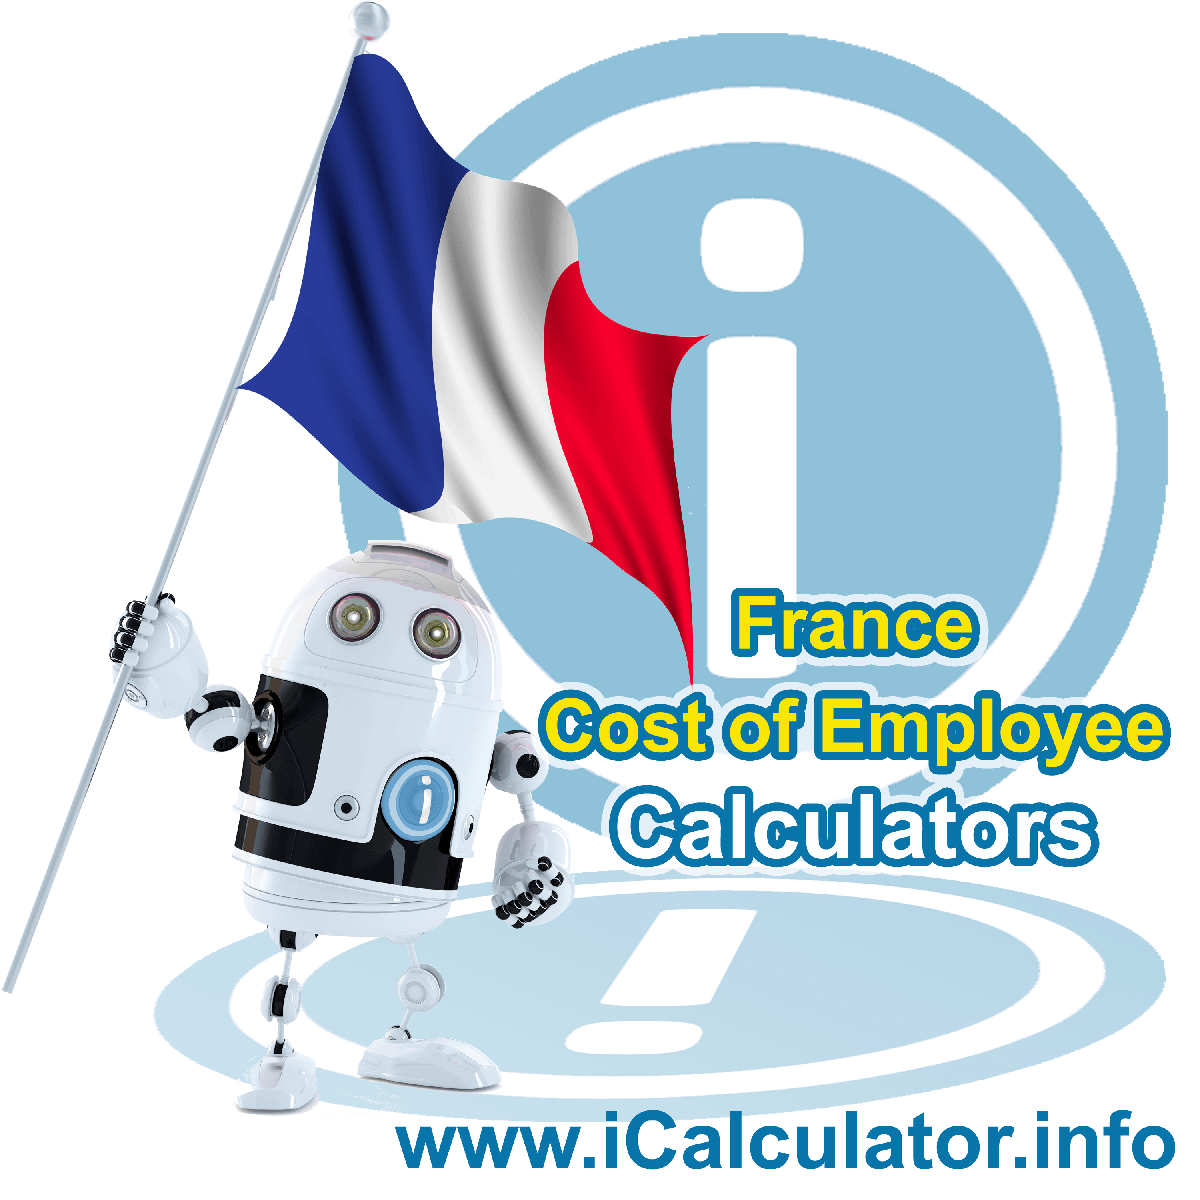 France Payroll Calculator. This image shows a new employer in France looking at payroll and human resource services in France as they want to hire an employee in France but are not sure of the employment costs. So, they make use of the France payroll calculator to understand their employment cost in France in 2023